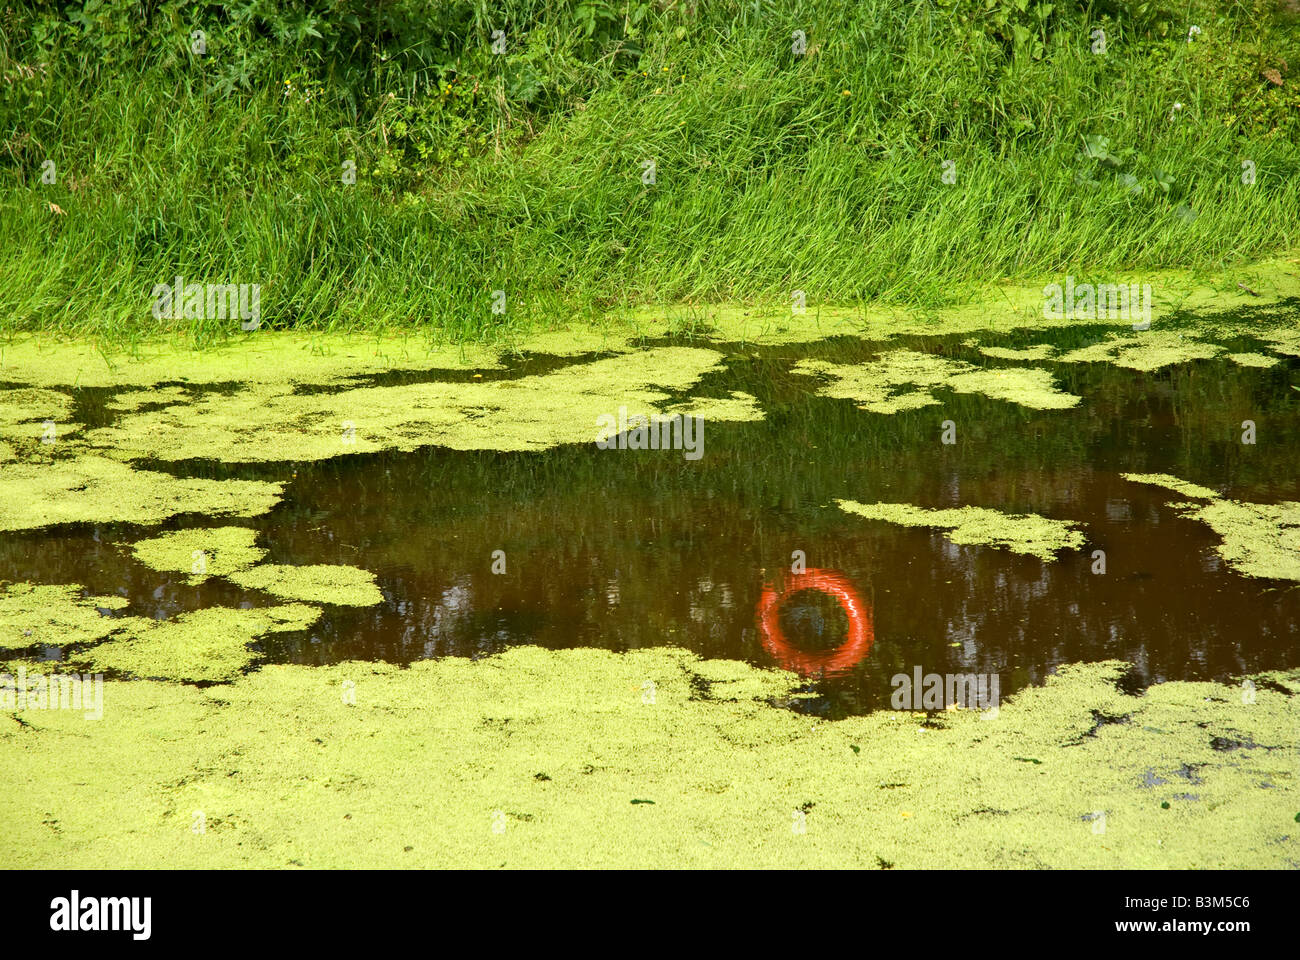 Reflection of red/orange life buoy in weed-covered pond Stock Photo